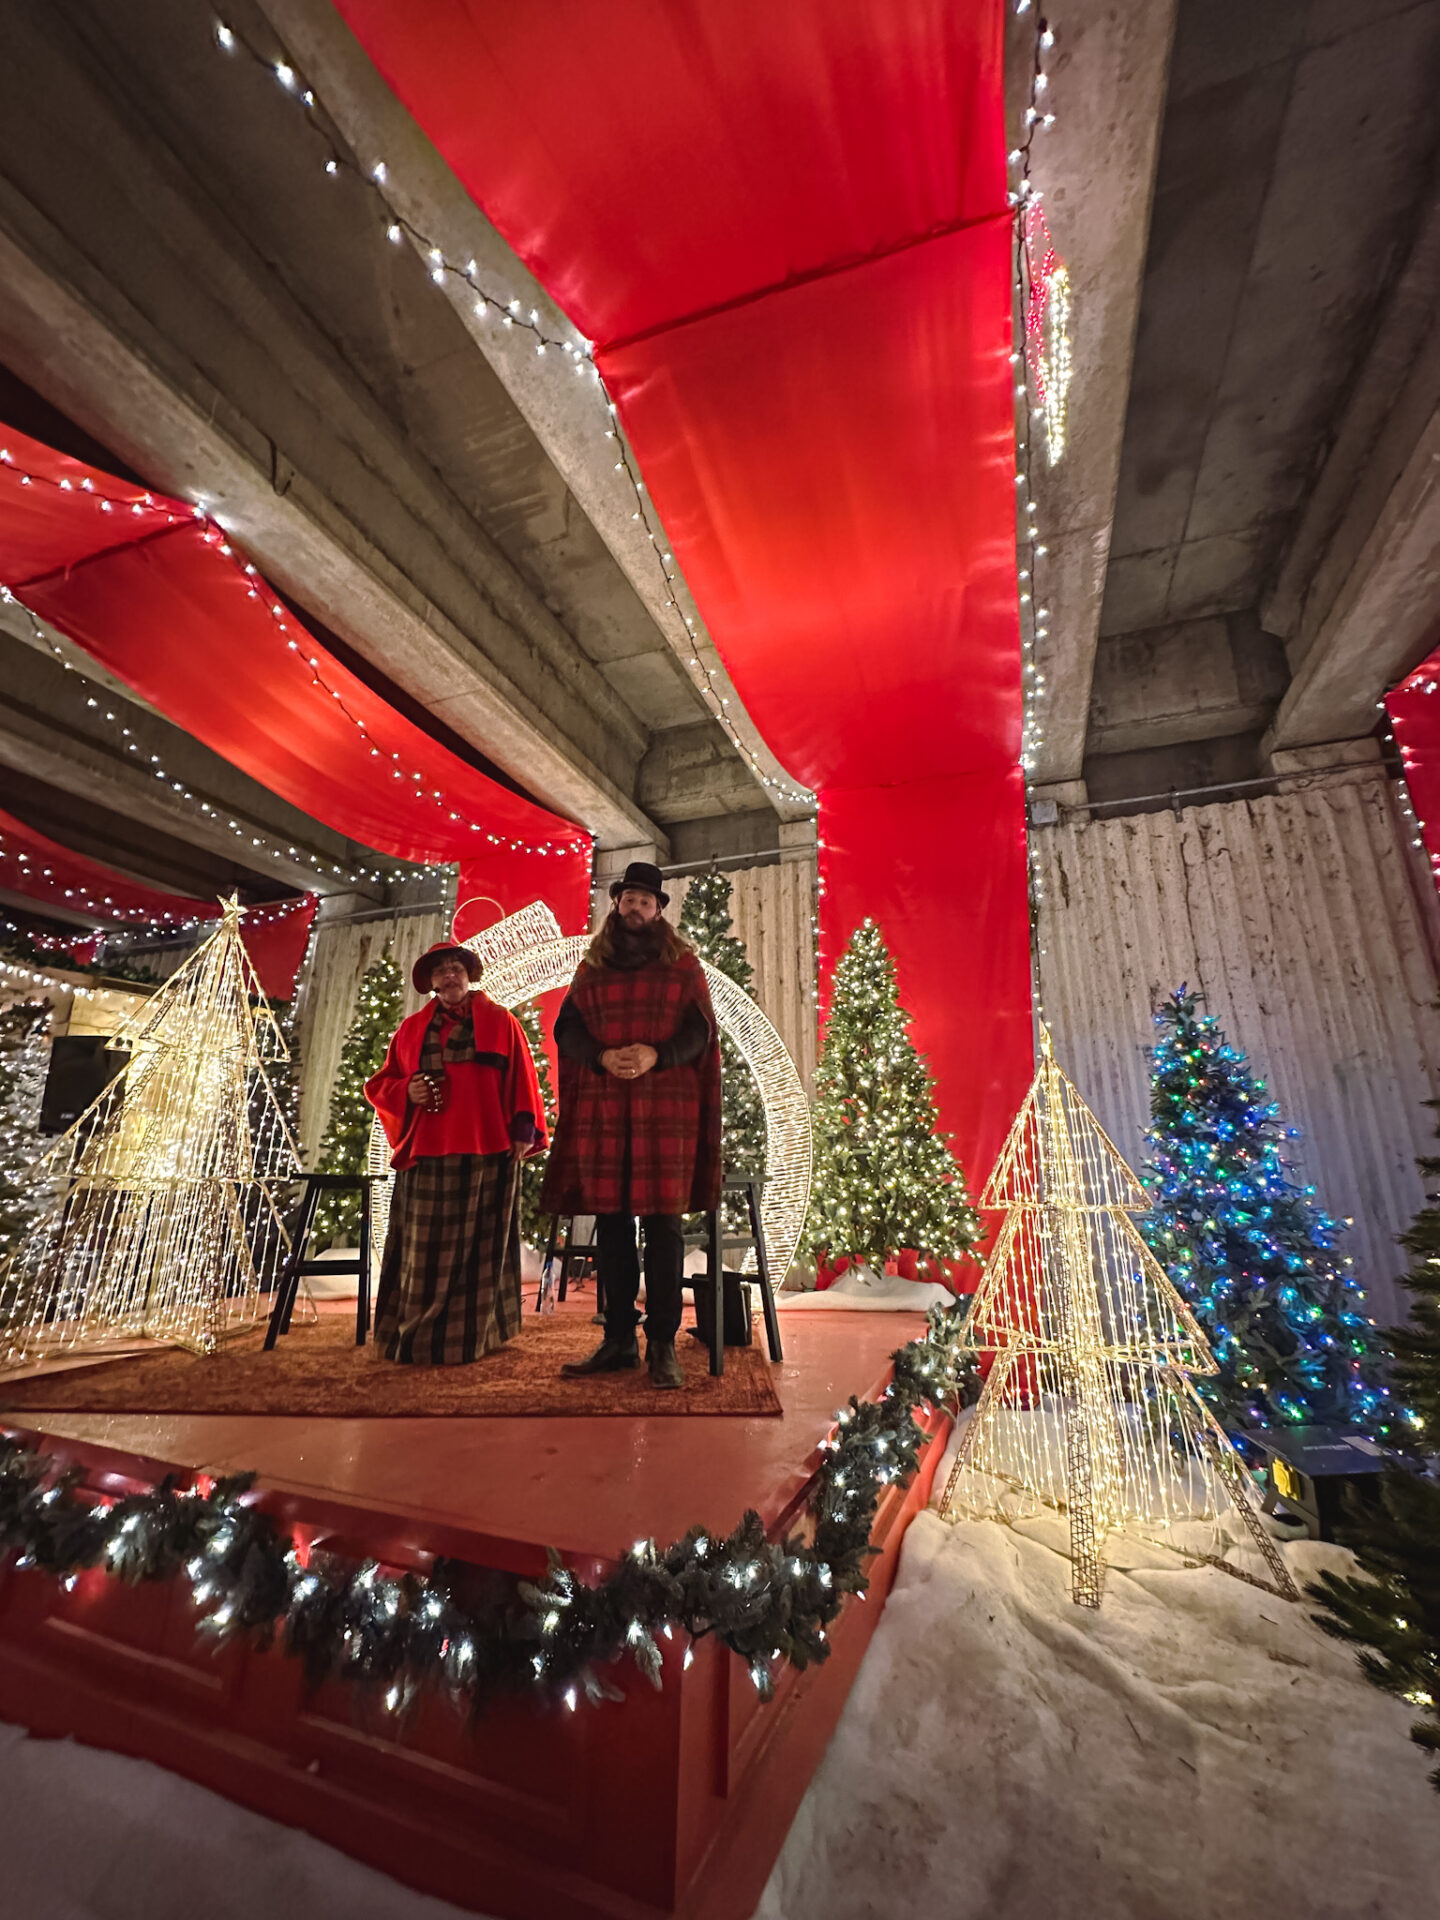 Canadian Tire Christmas Trail in North York